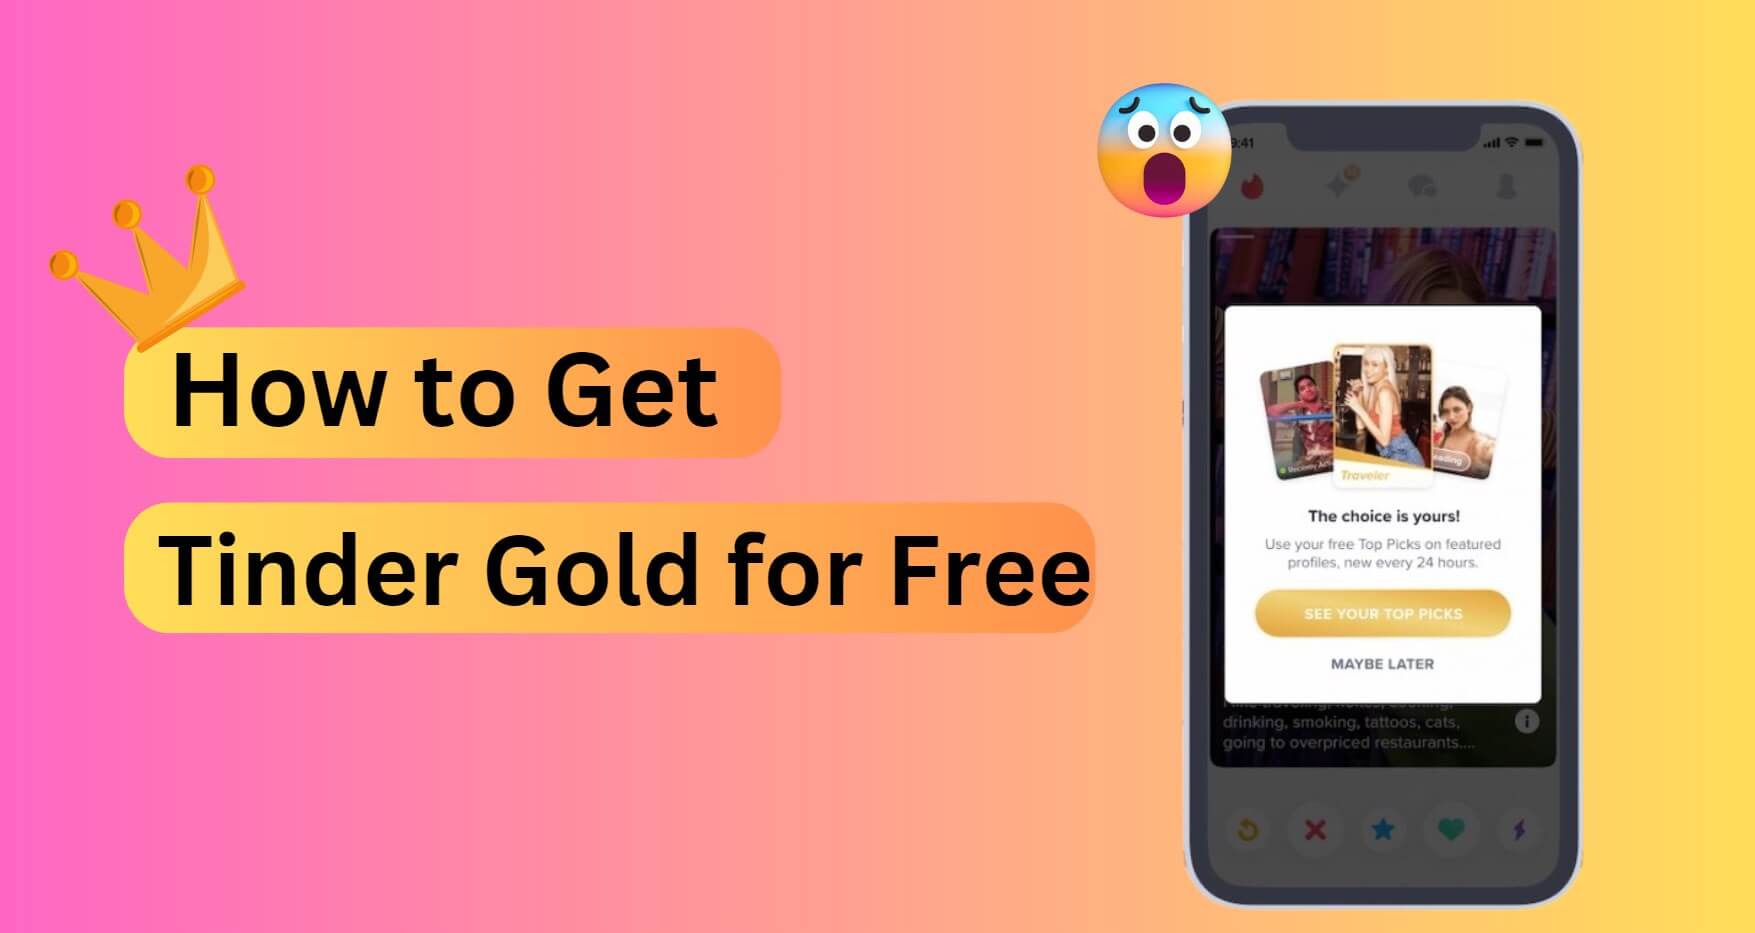 How to Get Tinder Gold for Free